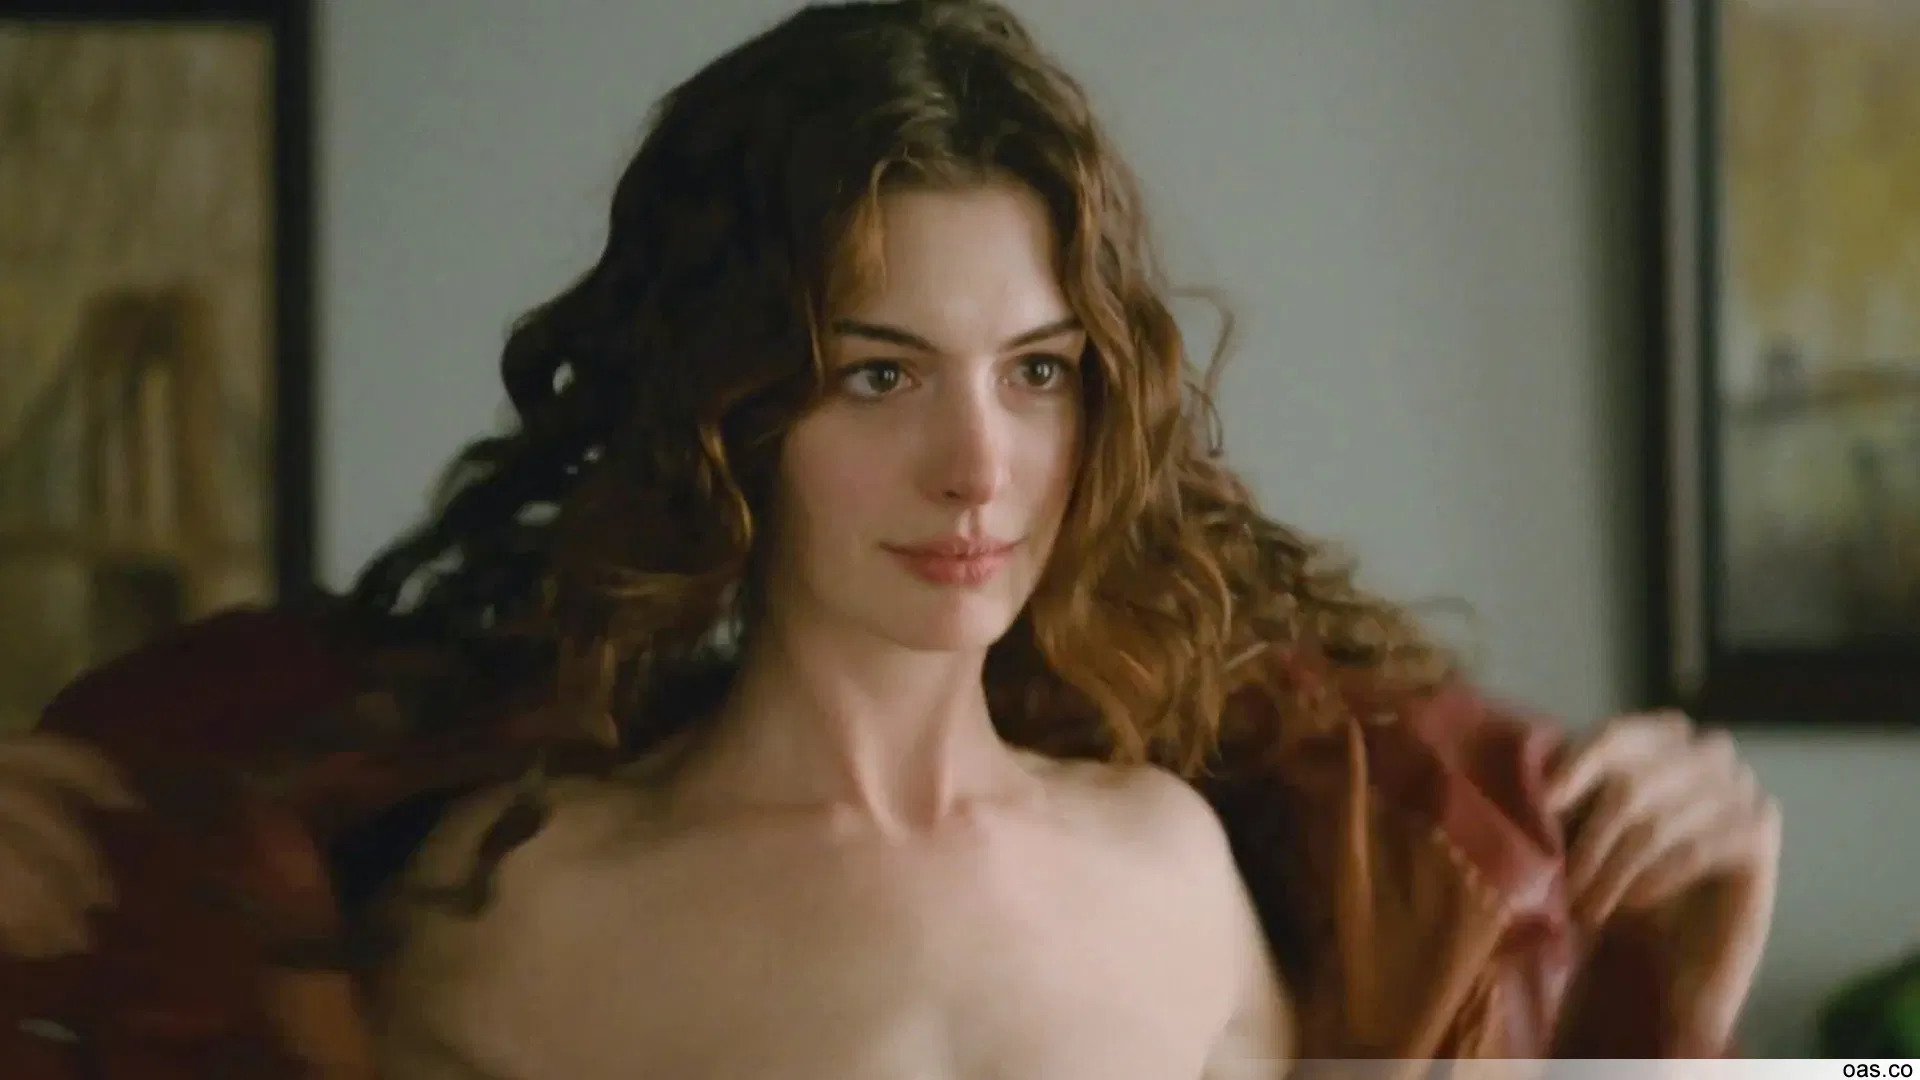 6 actors had terrible accidents while filming hot scenes: Anne Hathaway revealed her stuff in front of the whole crew, some even got 100% beaten - Photo 2.